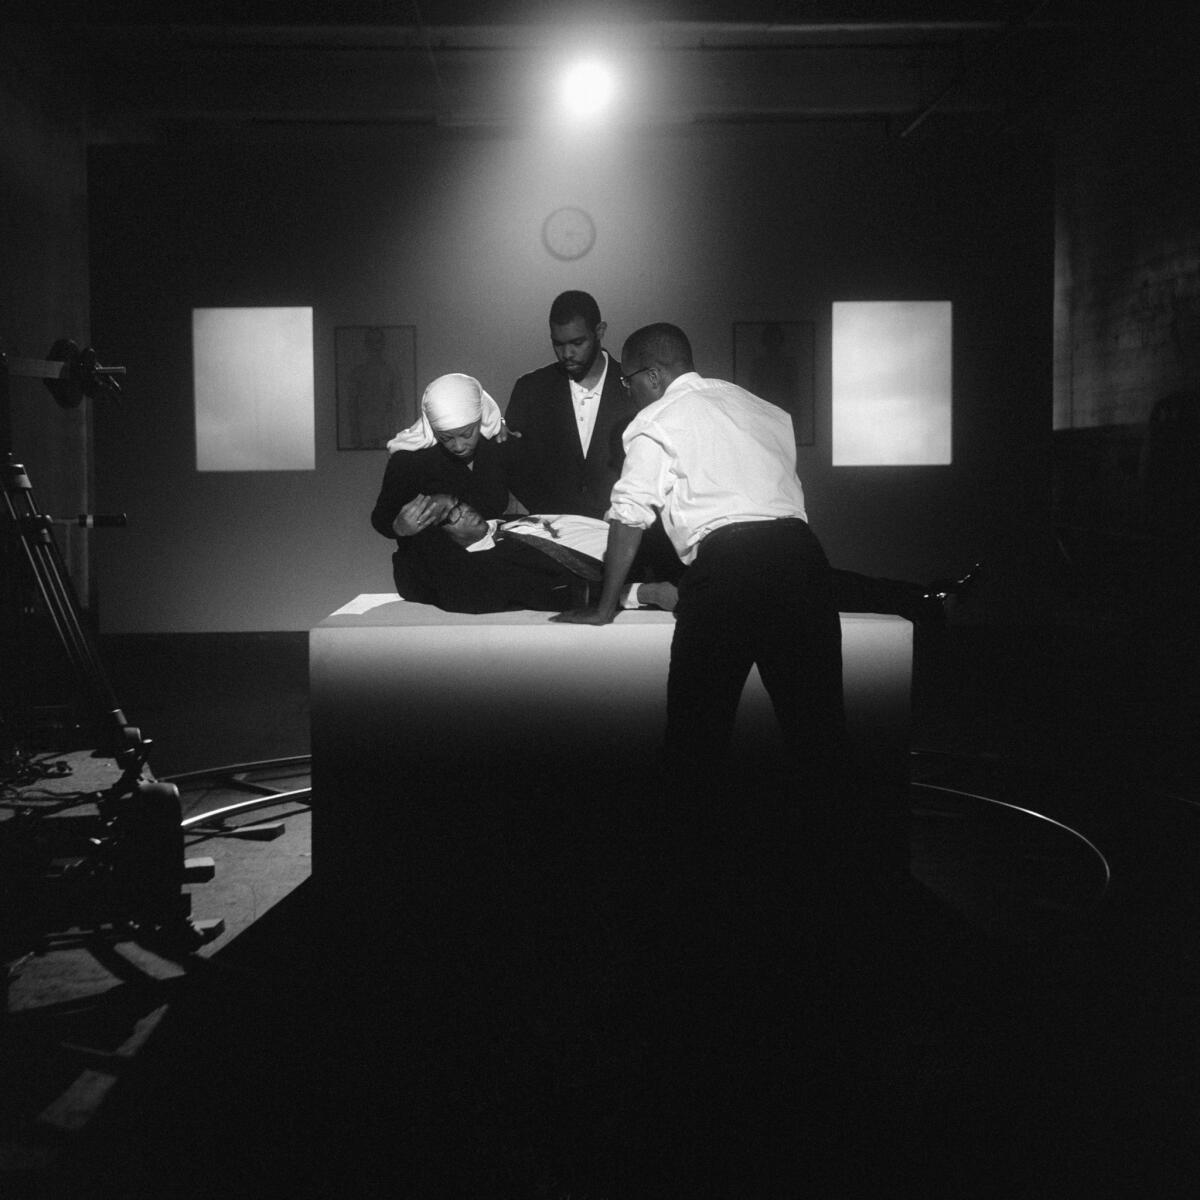 "The Assassination of Medgar, Malcolm, and Martin," 2008, an archival pigment print by Carrie Mae Weems, provides a contemporary view of the Black Panther Party. (Carrie Mae Weems / Jack Shainman Gallery, New York)